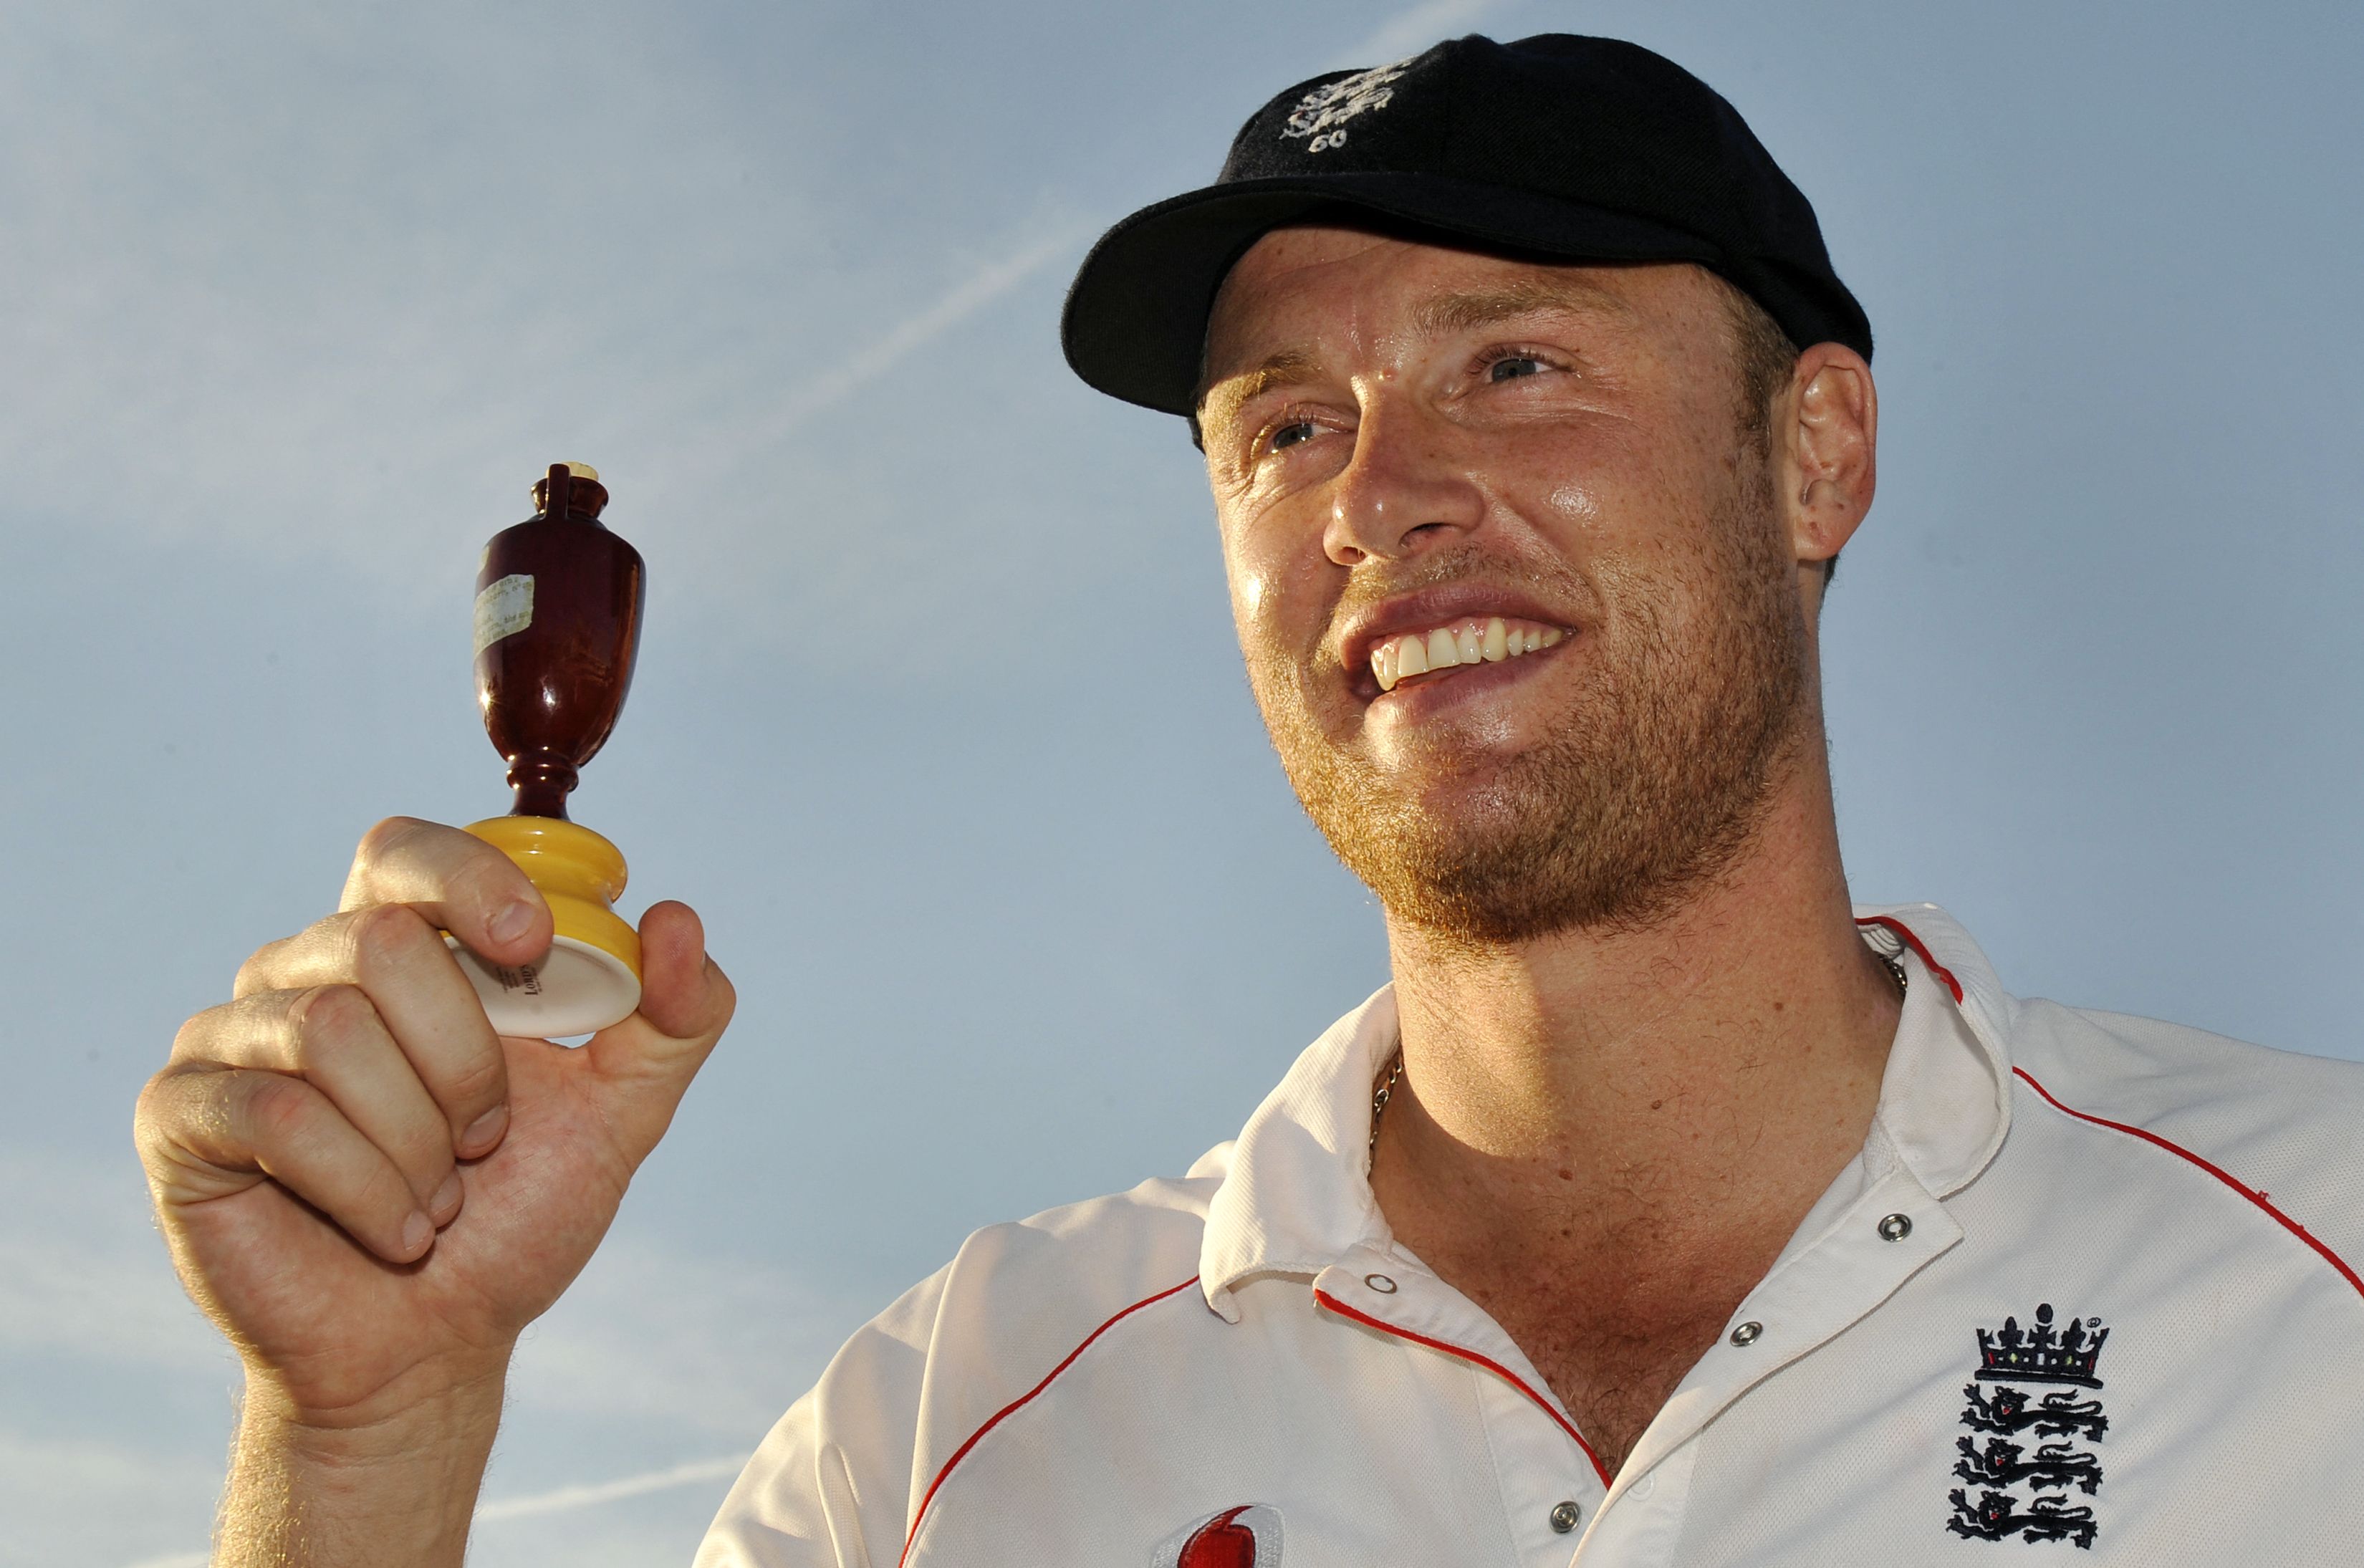 Former cricketer, Andrew Flintoff, England cricket team, england head coach, england, silverwood, silverwood steps down, ashes, eng vs aus, aus vs eng, ashes tets, ashesz tets series, eng lose ashes, cricket news, cricket